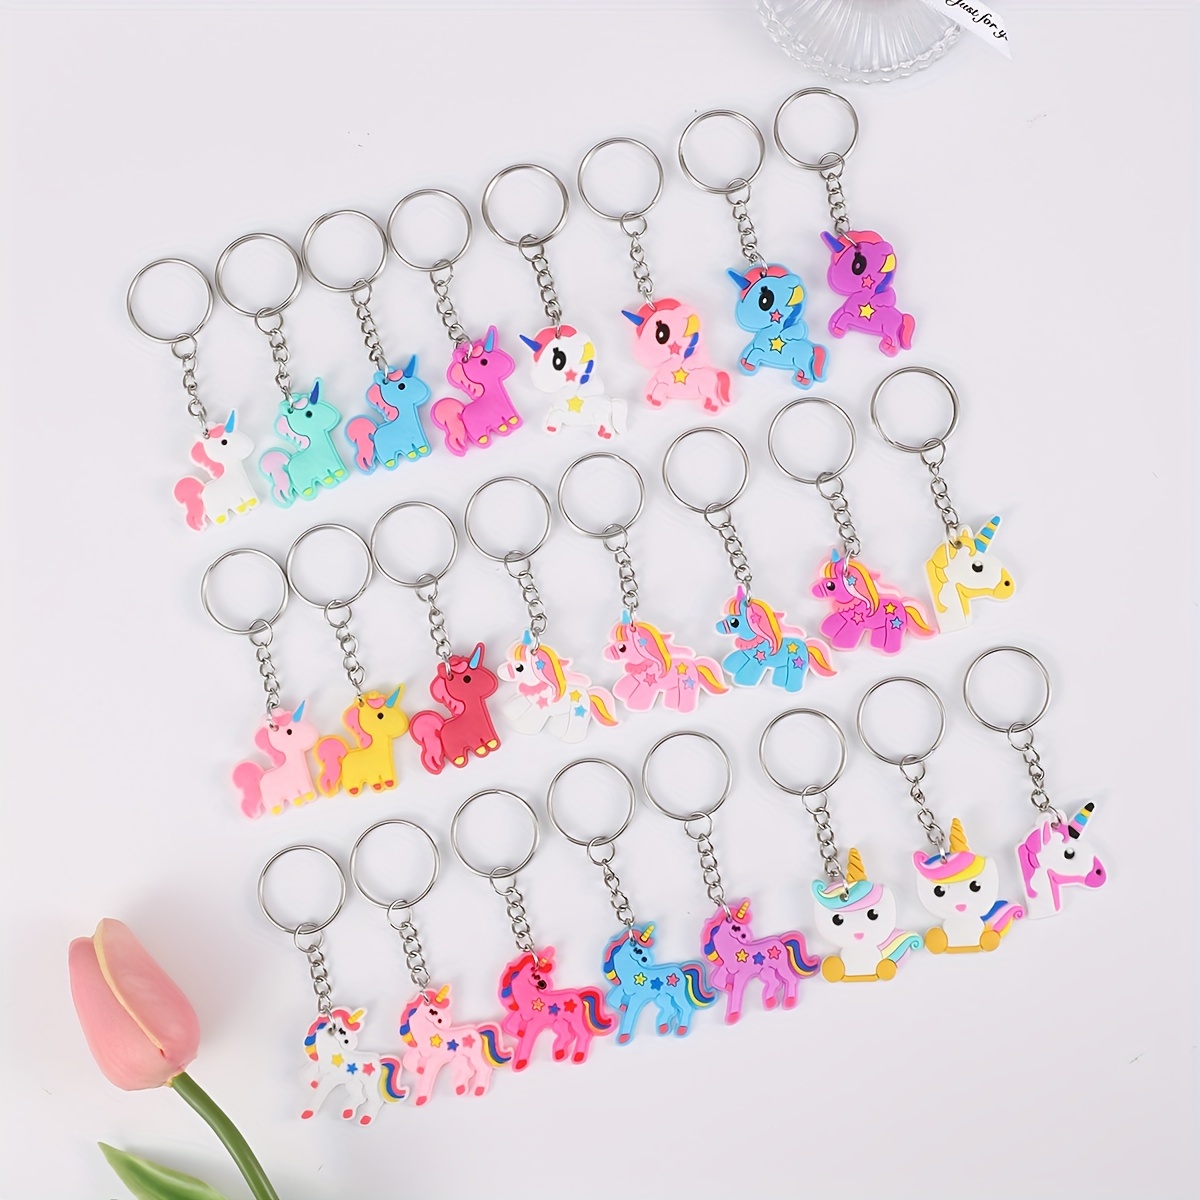 

24pcs Cartoon Pvc Unicorn Keychain Ladies Casual Cute Wallet Backpack Luggage Bag Accessories Pendant Key Chain Party Favors Gifts